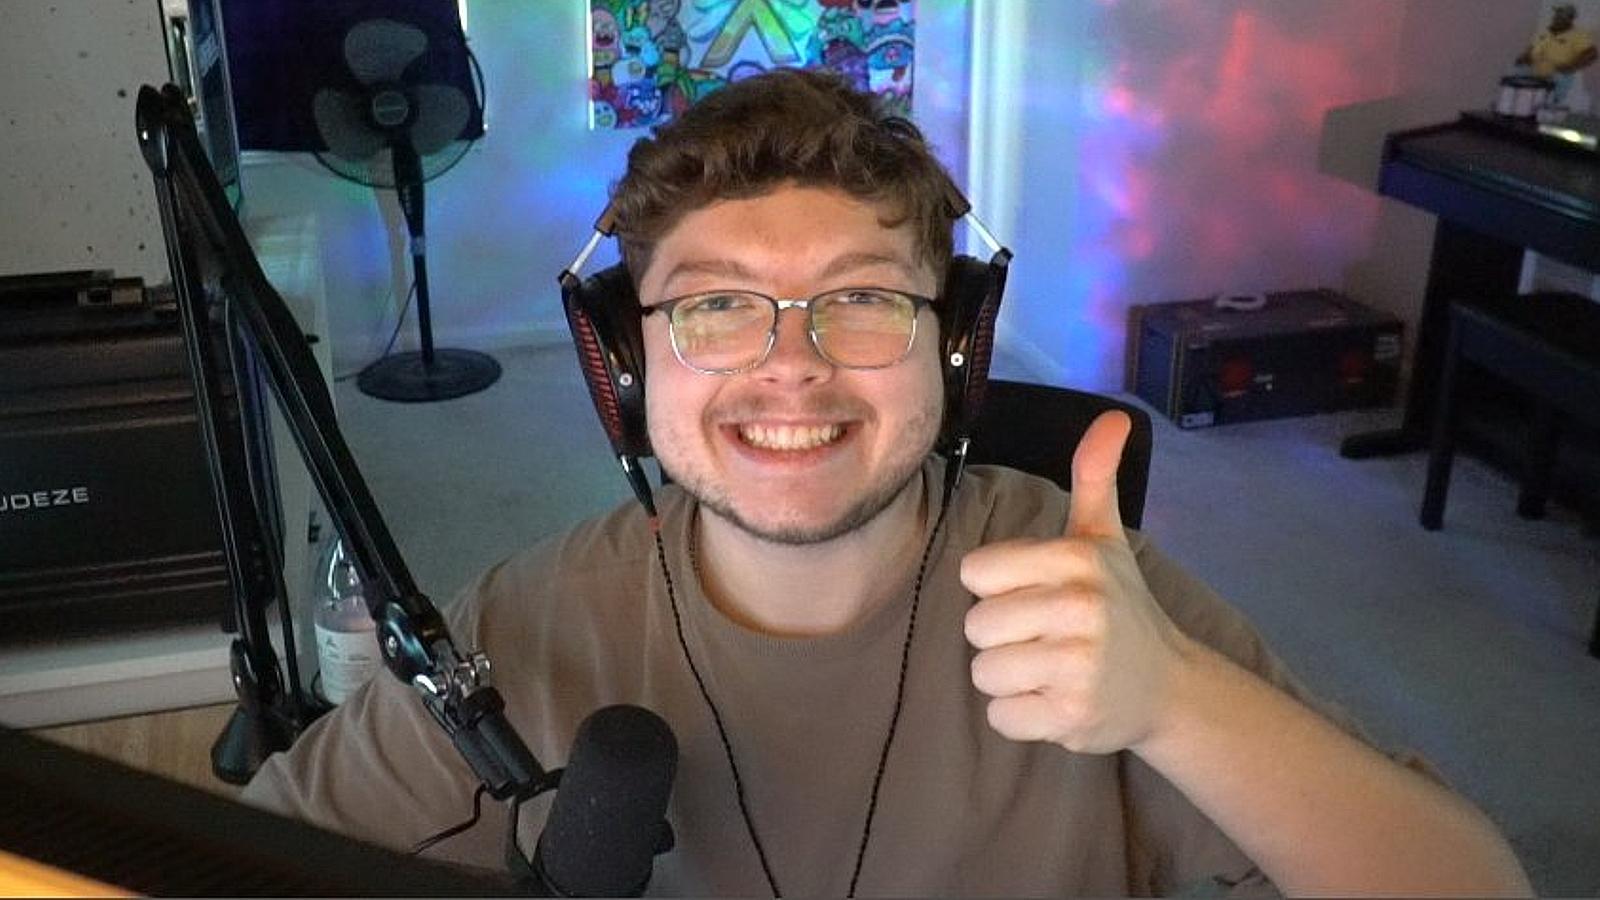 aydan holding his thumb up and smiling in Twitch stream